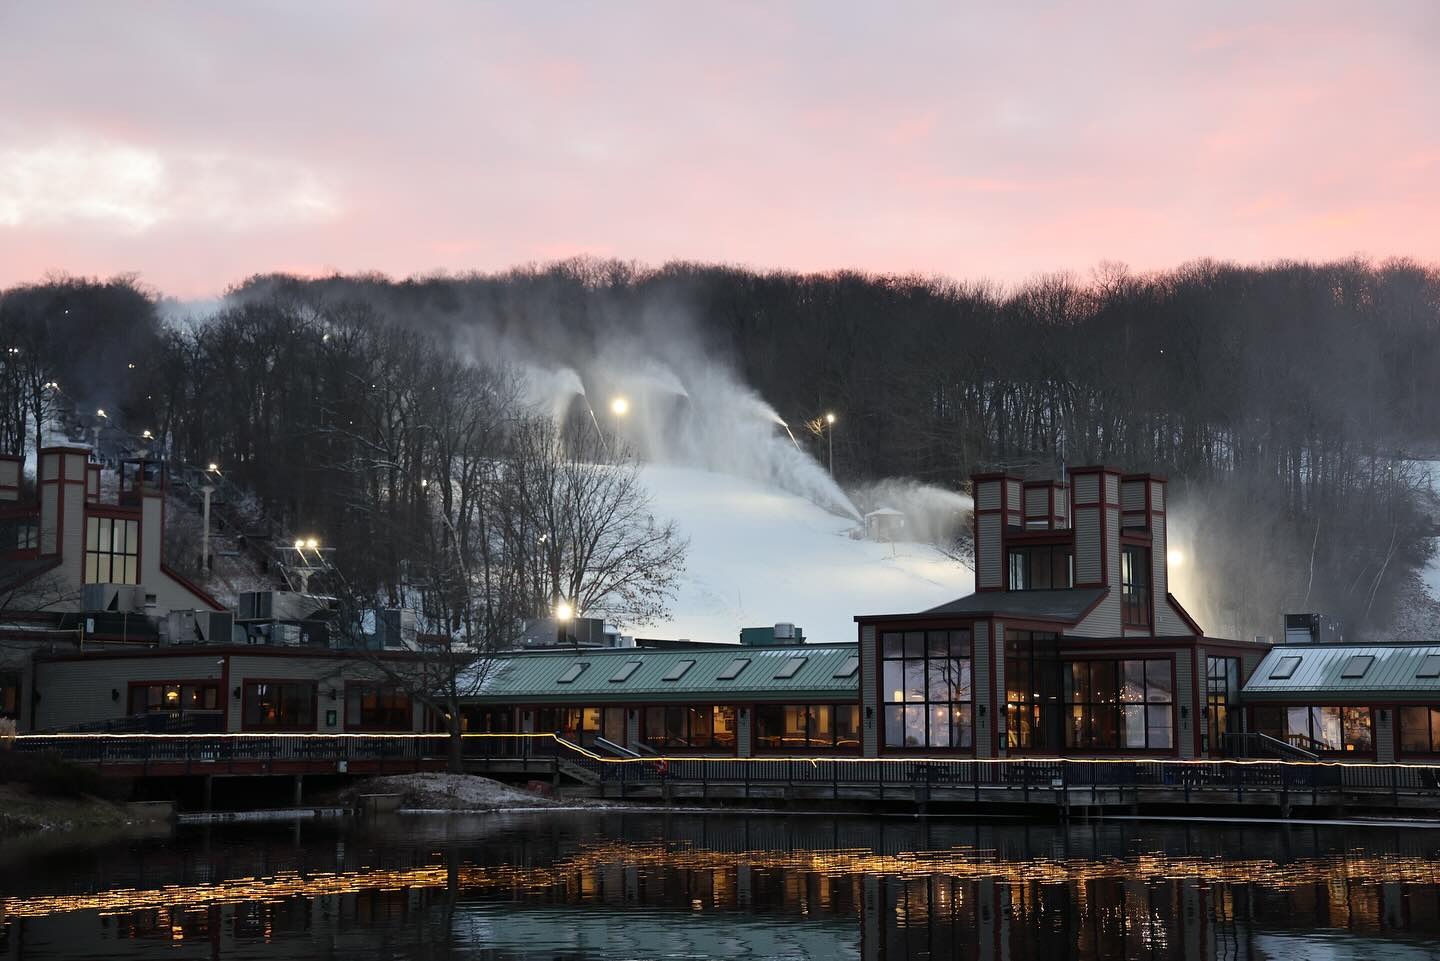 Machines making artificial snow at Wachusett Mountain to supplement natural snowfall